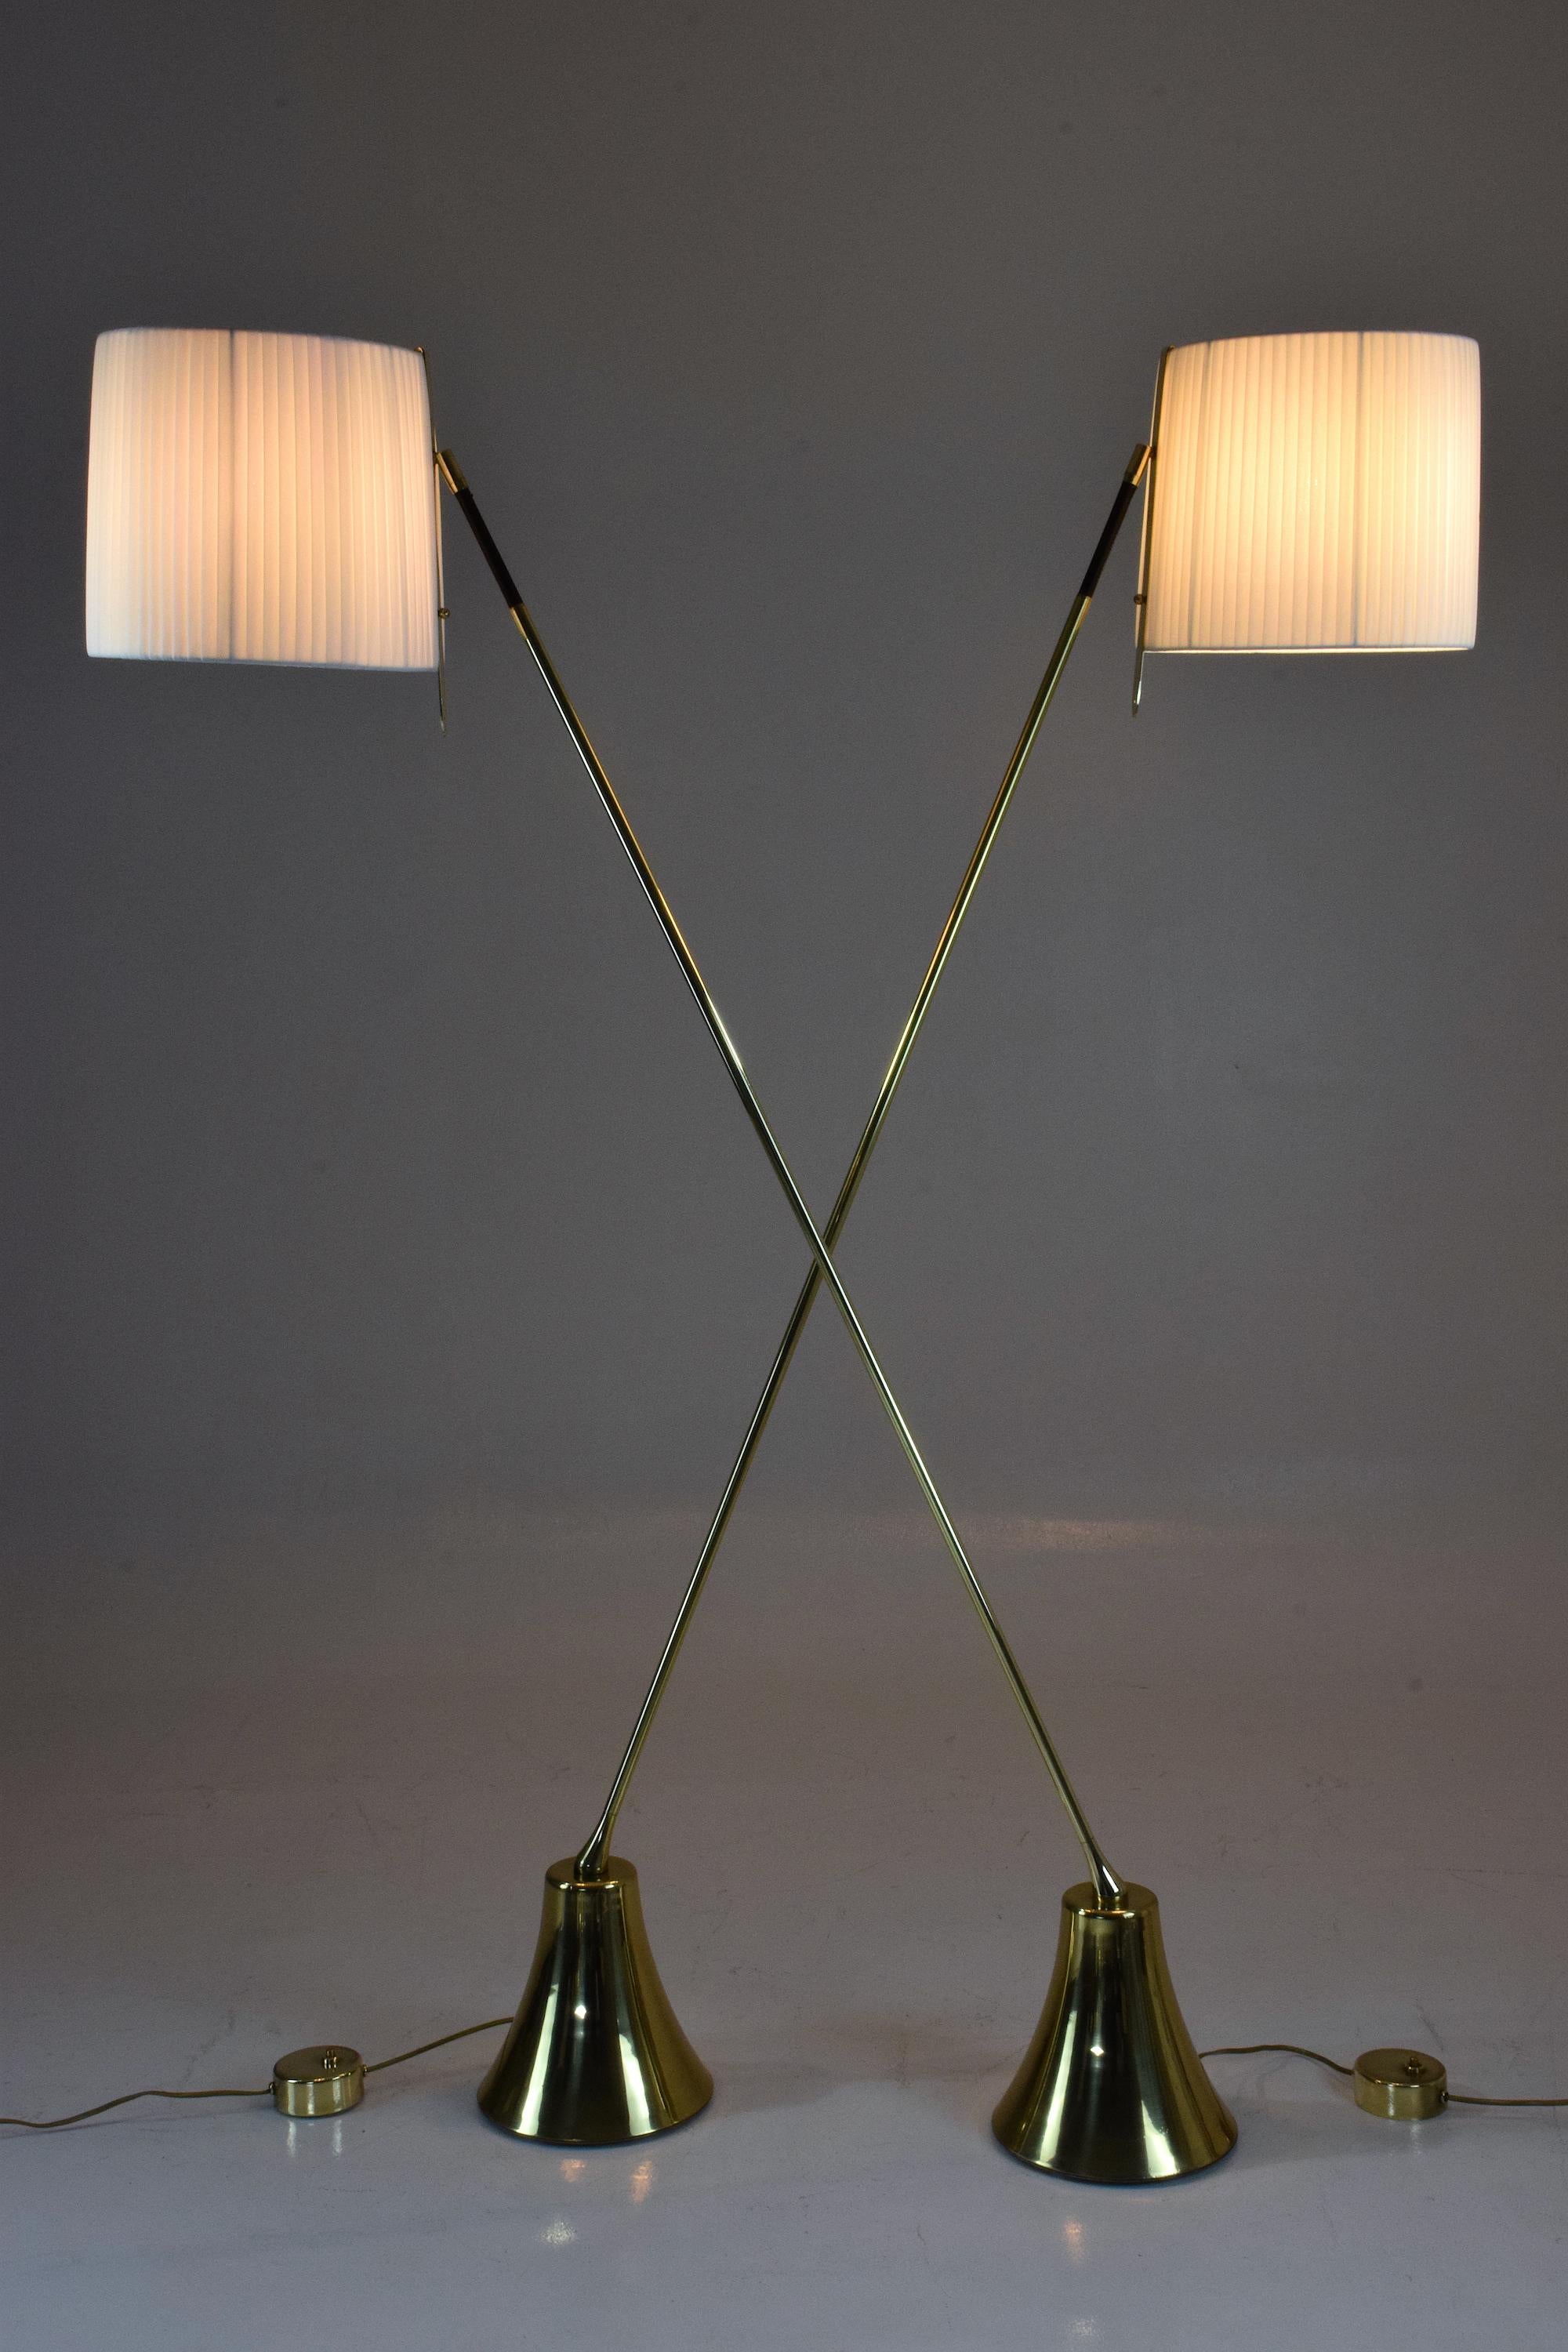 Equilibrium-VII Tall Brass Articulating Floor Lamp, Flow Collection (Messing)